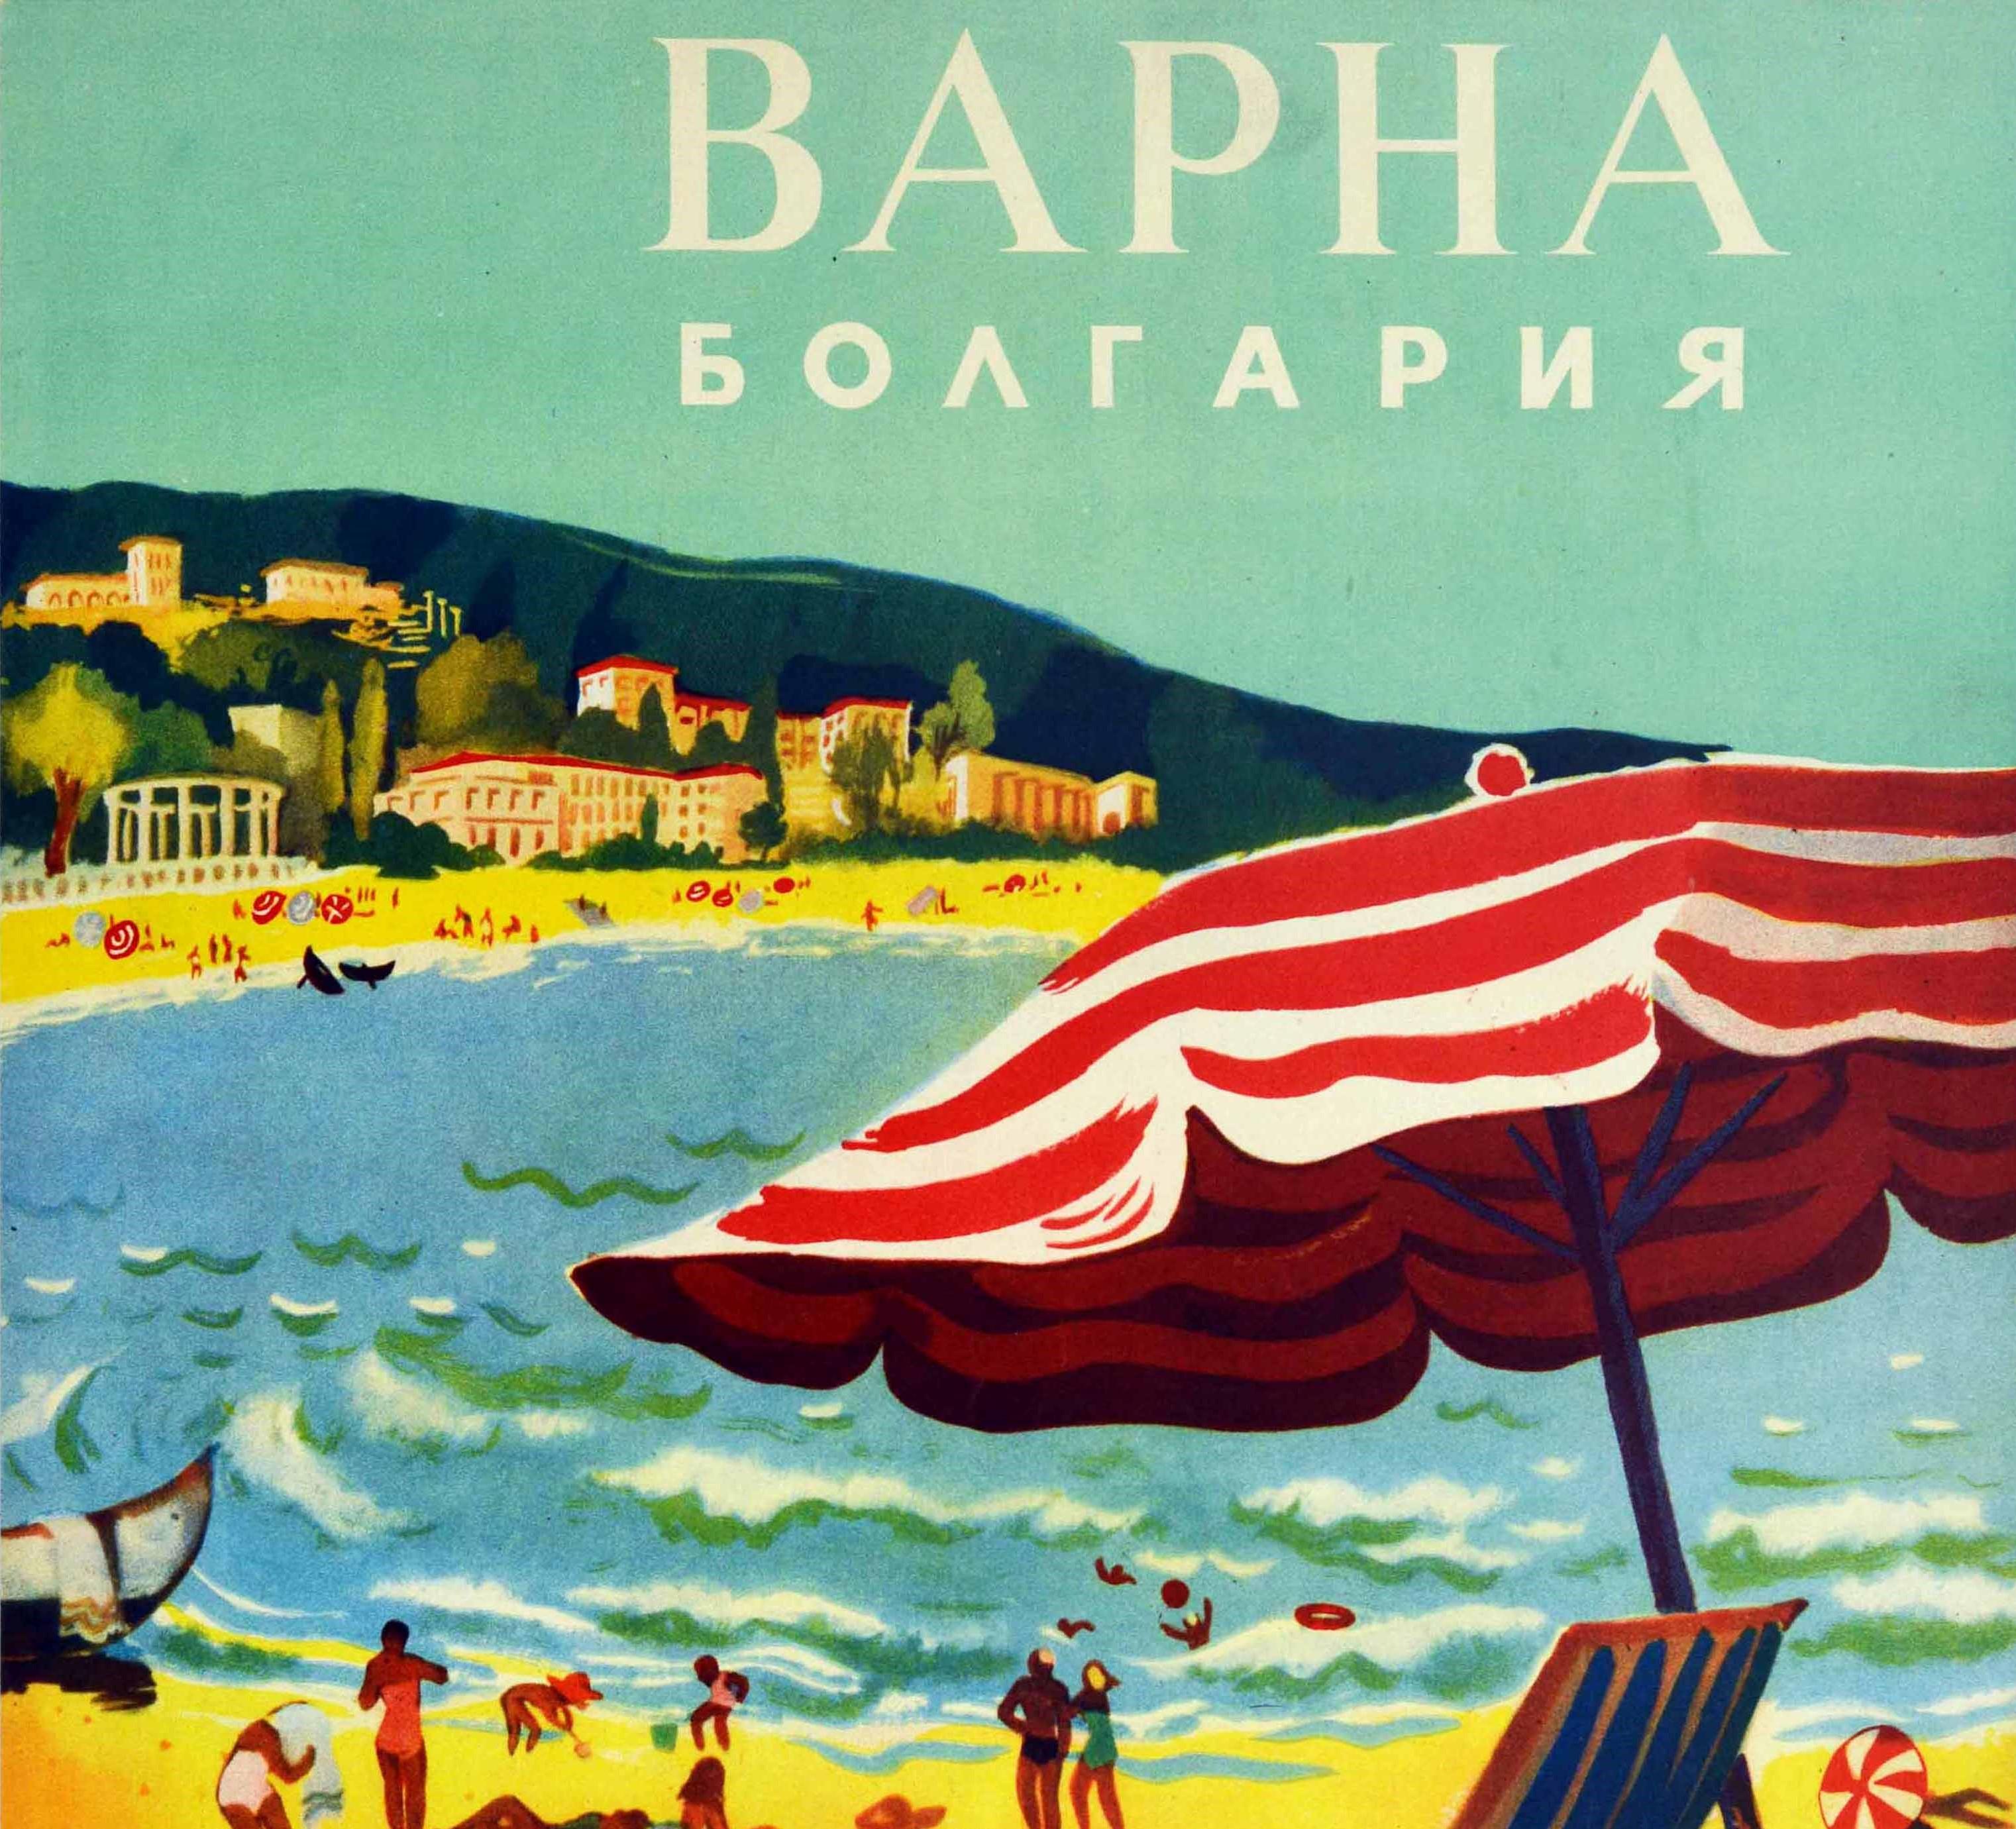 Original vintage travel poster for Varna Bulgaria issued by Balkantourist (the oldest Bulgarian tourism company founded in 1948) featuring people swimming in the sea and sunbathing with children playing on a sandy beach curving around the coast past